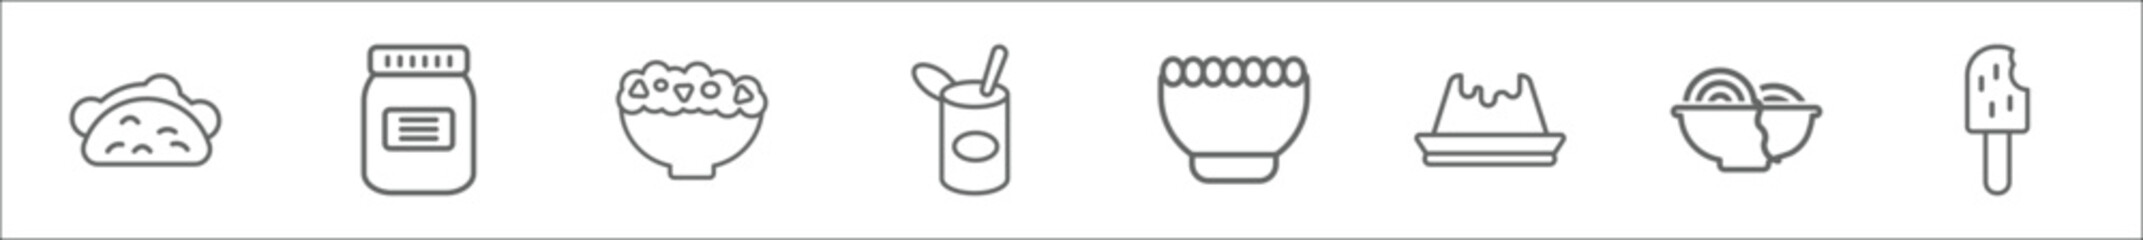 outline set of bistro and restaurant line icons. linear vector icons such as pita bread, mermelade jar, appetizers bowl, open tin with spoon, bowl of olives, creme caramel, spaghetti bolognese, ice